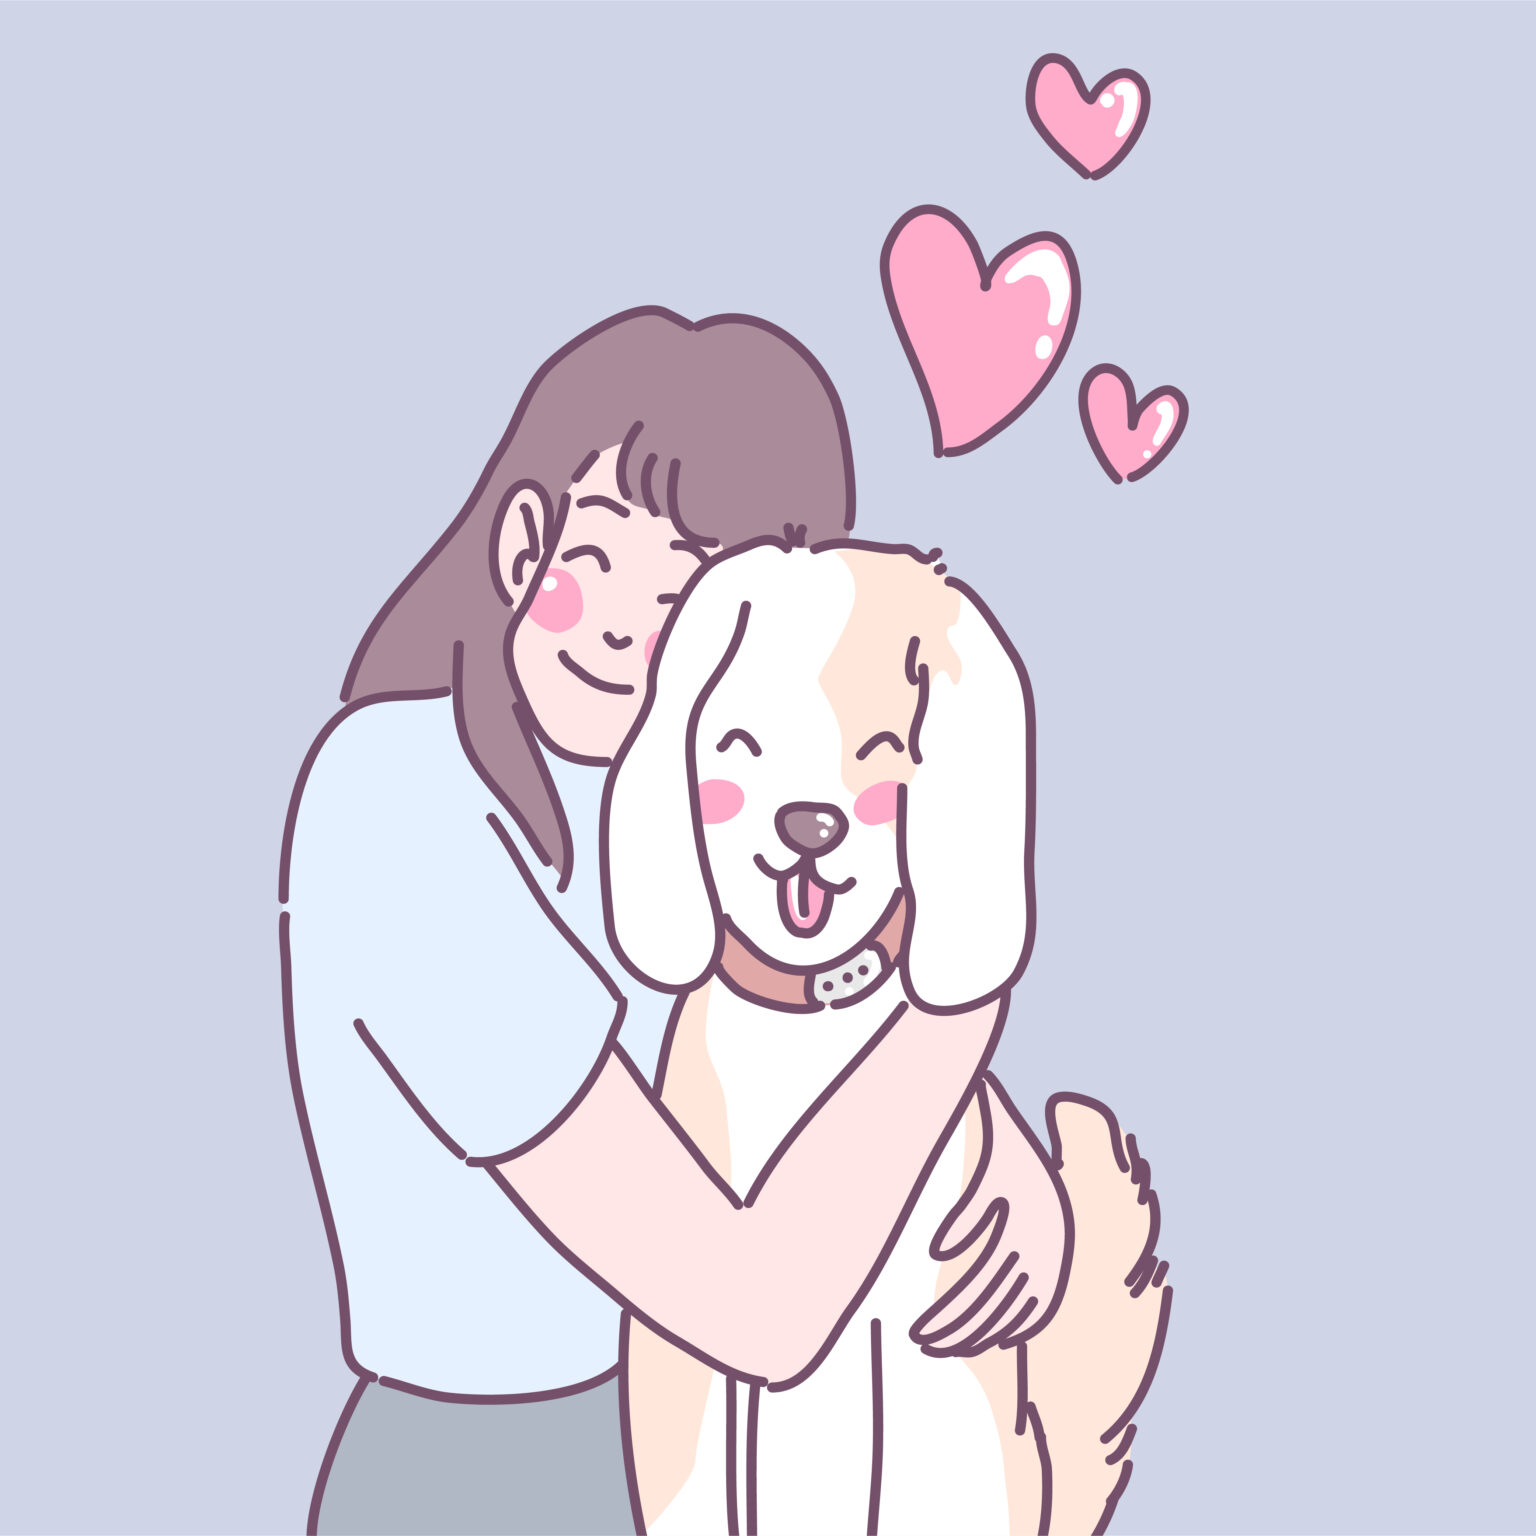 A woman who shows love for dogs by hugging